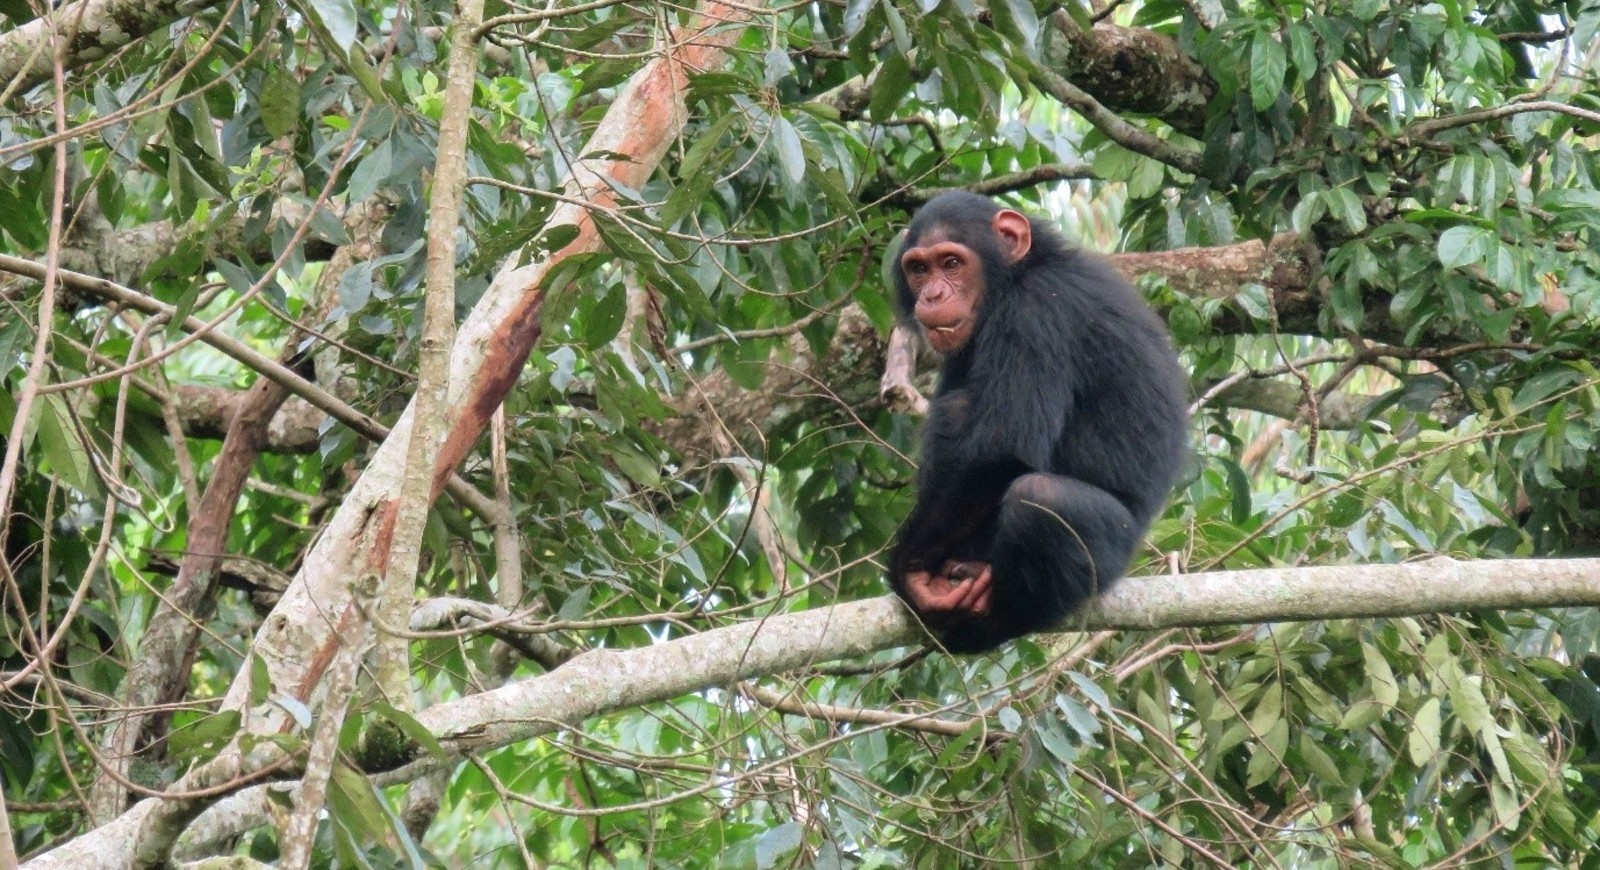 A photo of a chimpanzee sitting high up in the branches of a green tree